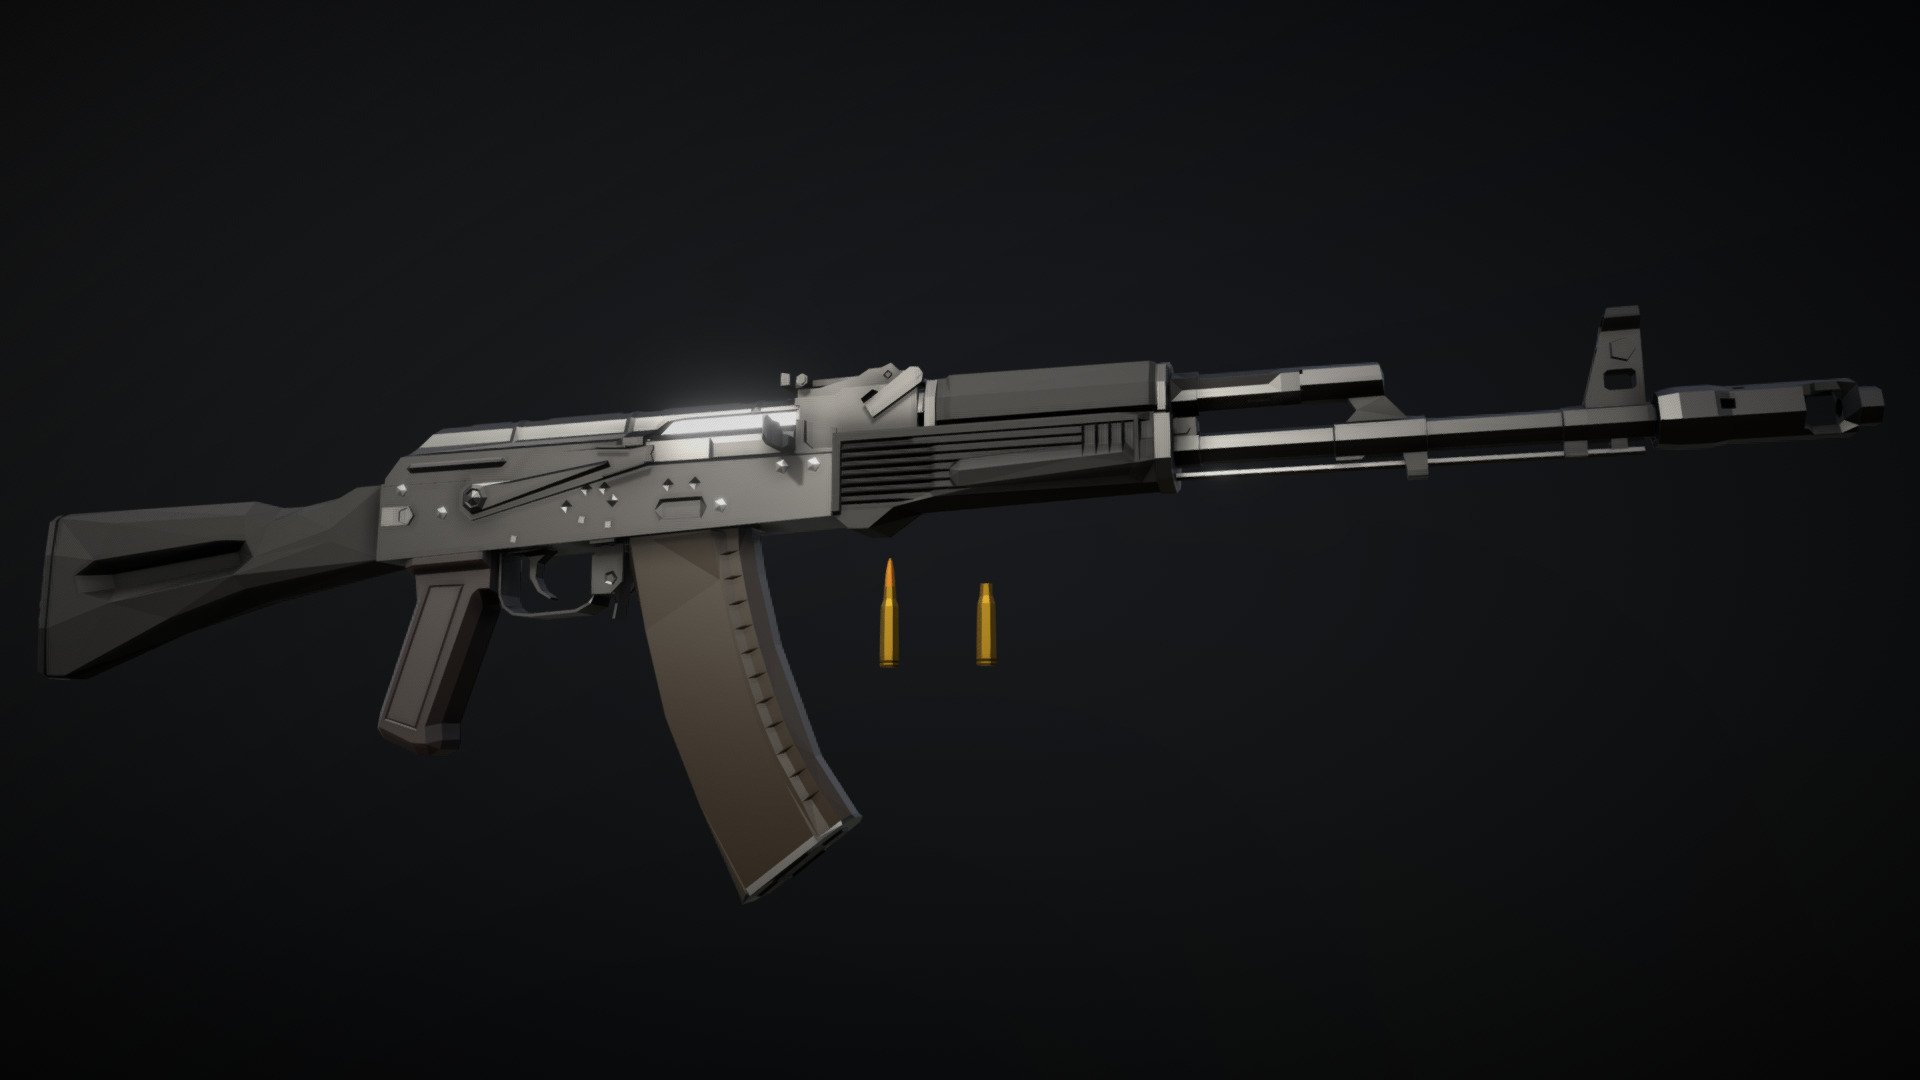 A lowpoly model of the AK-74M, the modernization of the AK-74 rifle, with polymer furniture, a folding stock, new magazines, and a variety of attachable parts, from scopes to stocks to suppressors and grenade launchers, all aimed at combining previous AK-74 variants such as the AKS-74, and the AK-74N into a single, modern weapons platform 3d model